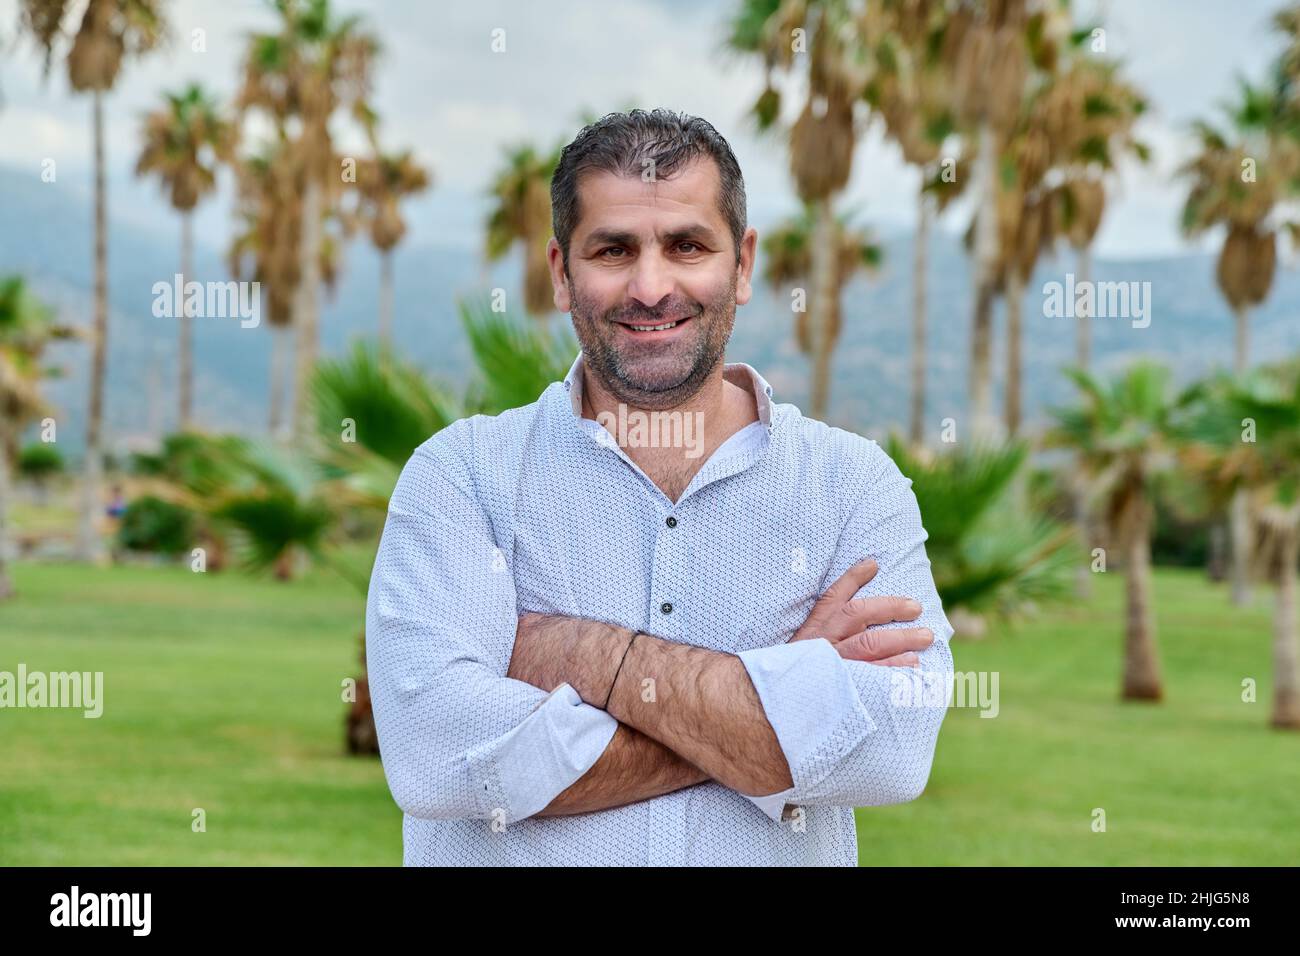 Outdoor portrait of mature confident man looking at camera Stock Photo